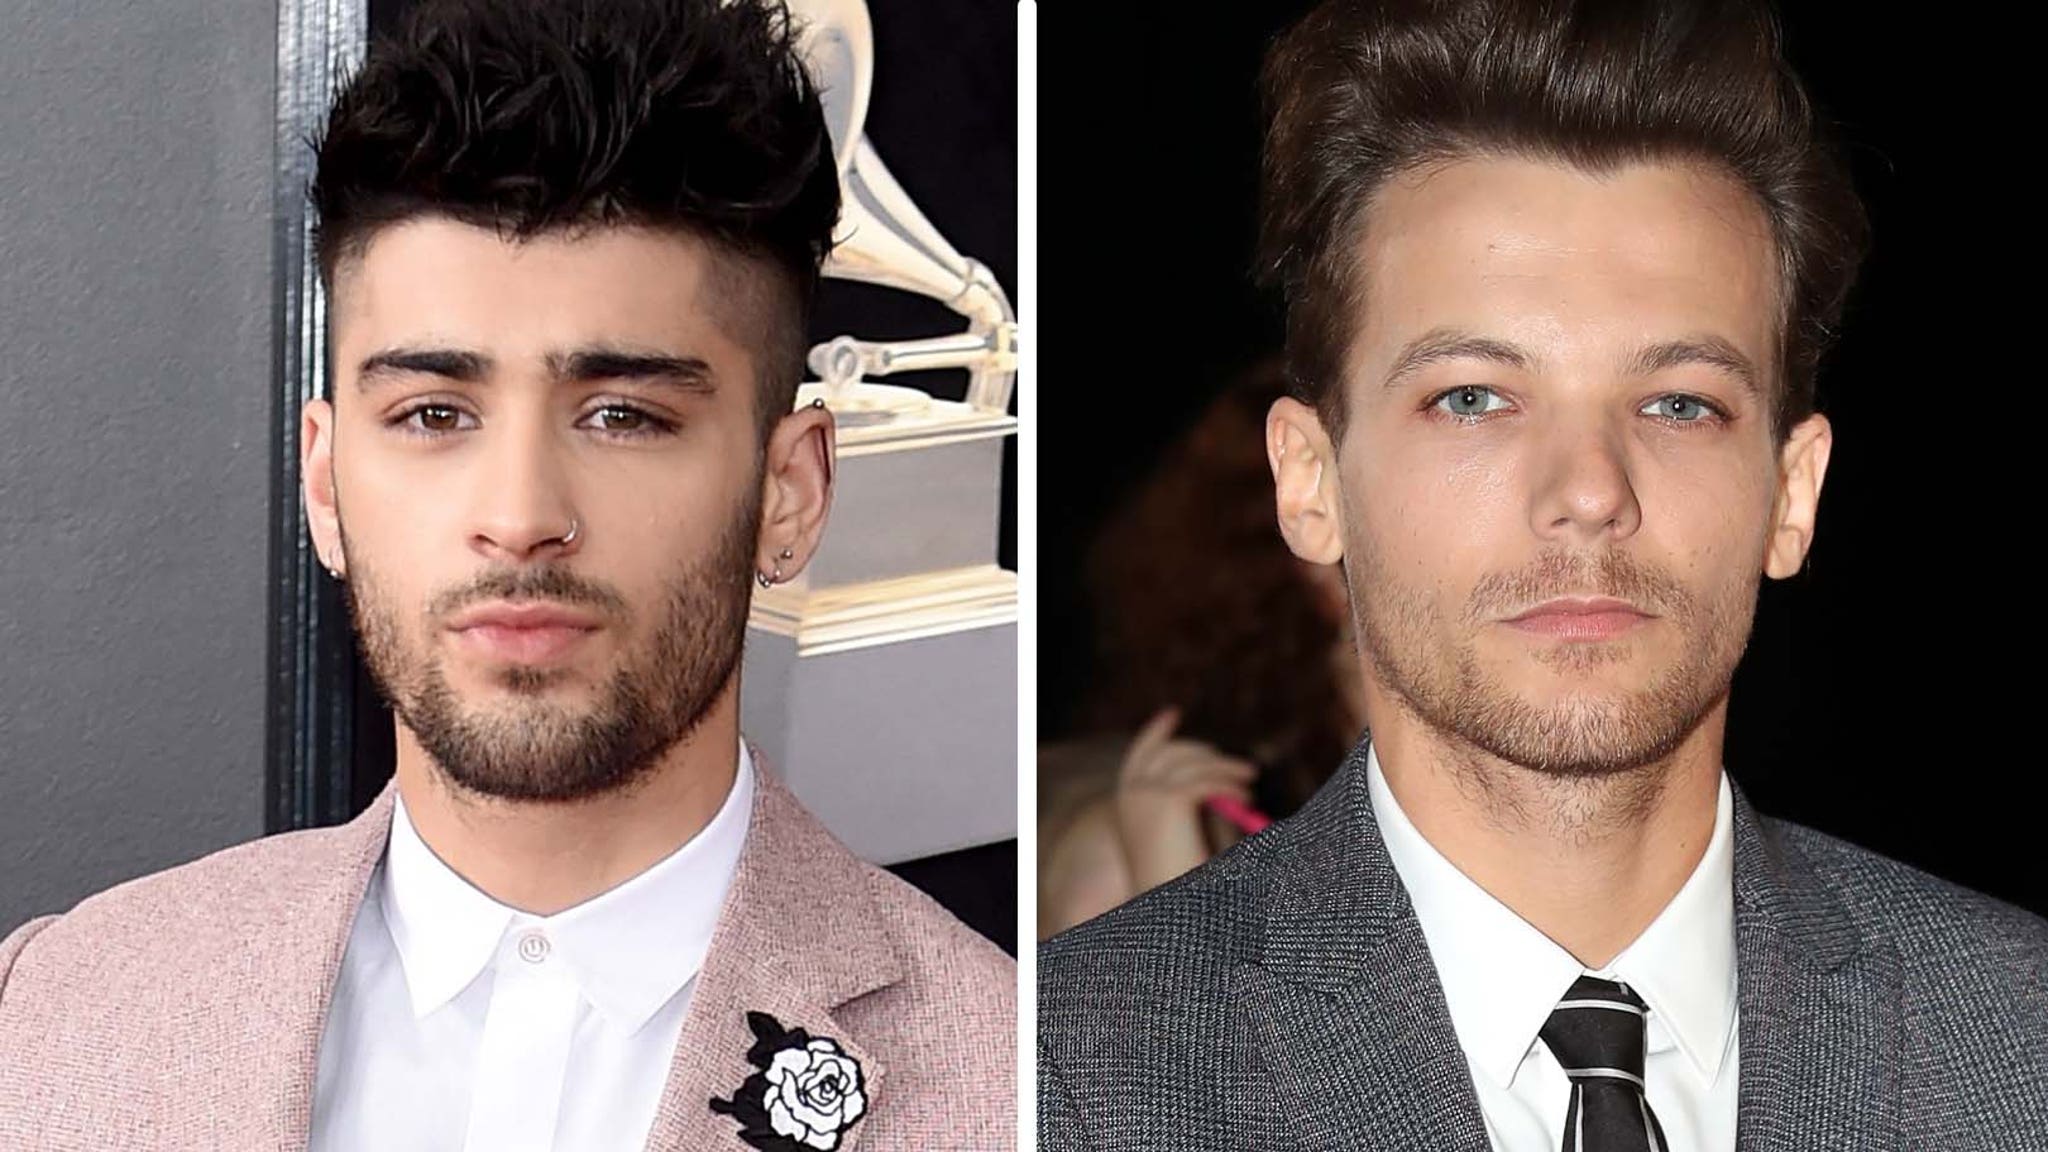 Louis Tomlinson on His Relationship With Zayn Malik